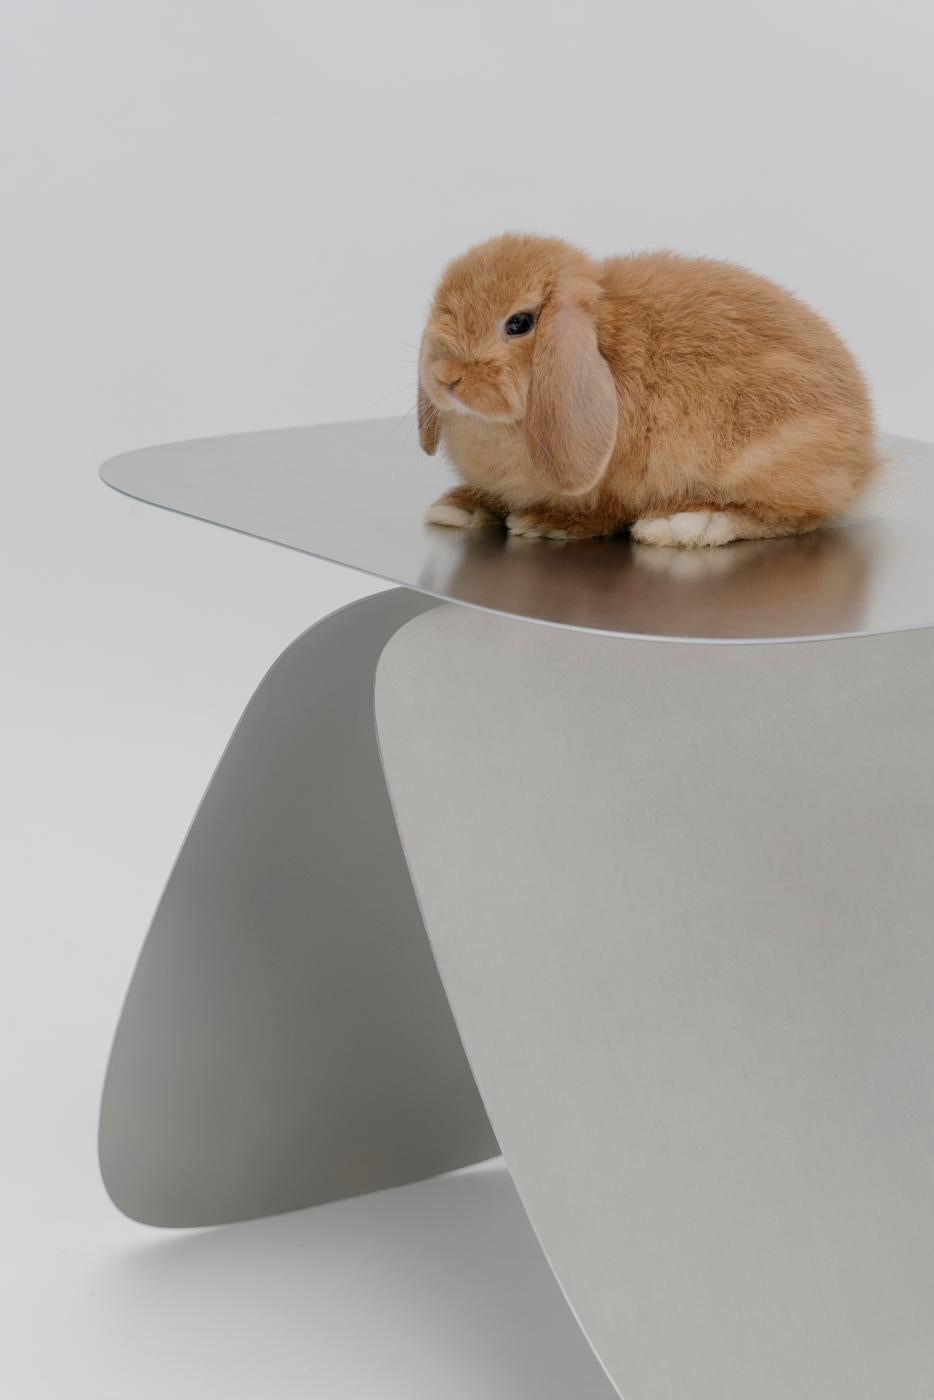 Bunny table is a whimsical side table that it’s base resembles bunny ears. Minimal by its
appearance, Bunny table is simply made out of three pieces of steel cut outs, resulting in
a timeless design.

‘Bunny Table’ is a whimsical side table made